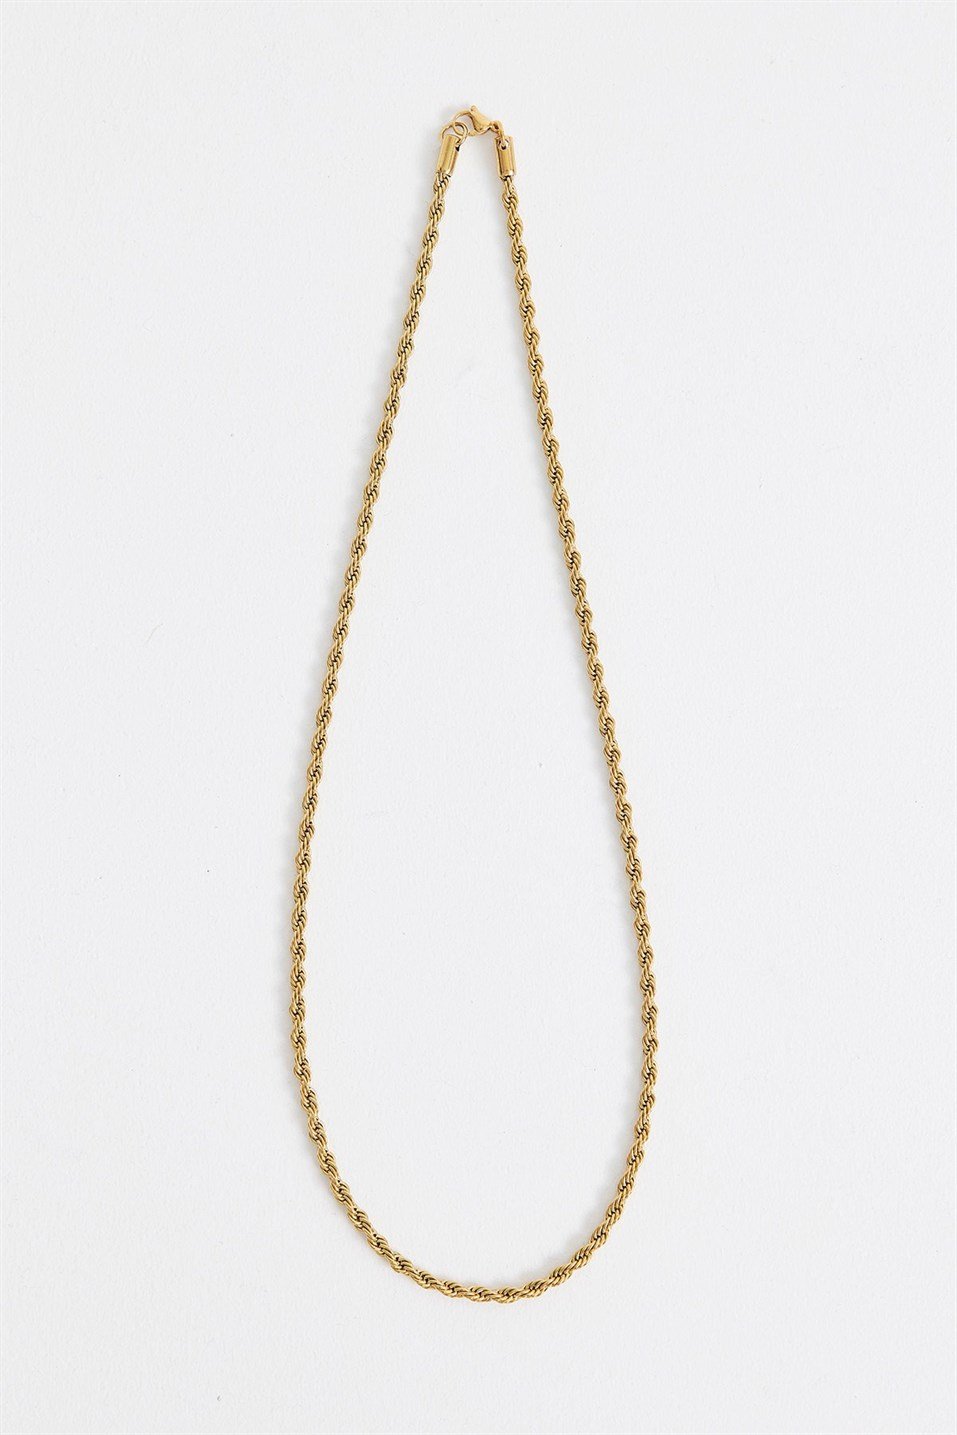 Gold Long Spiral Necklace